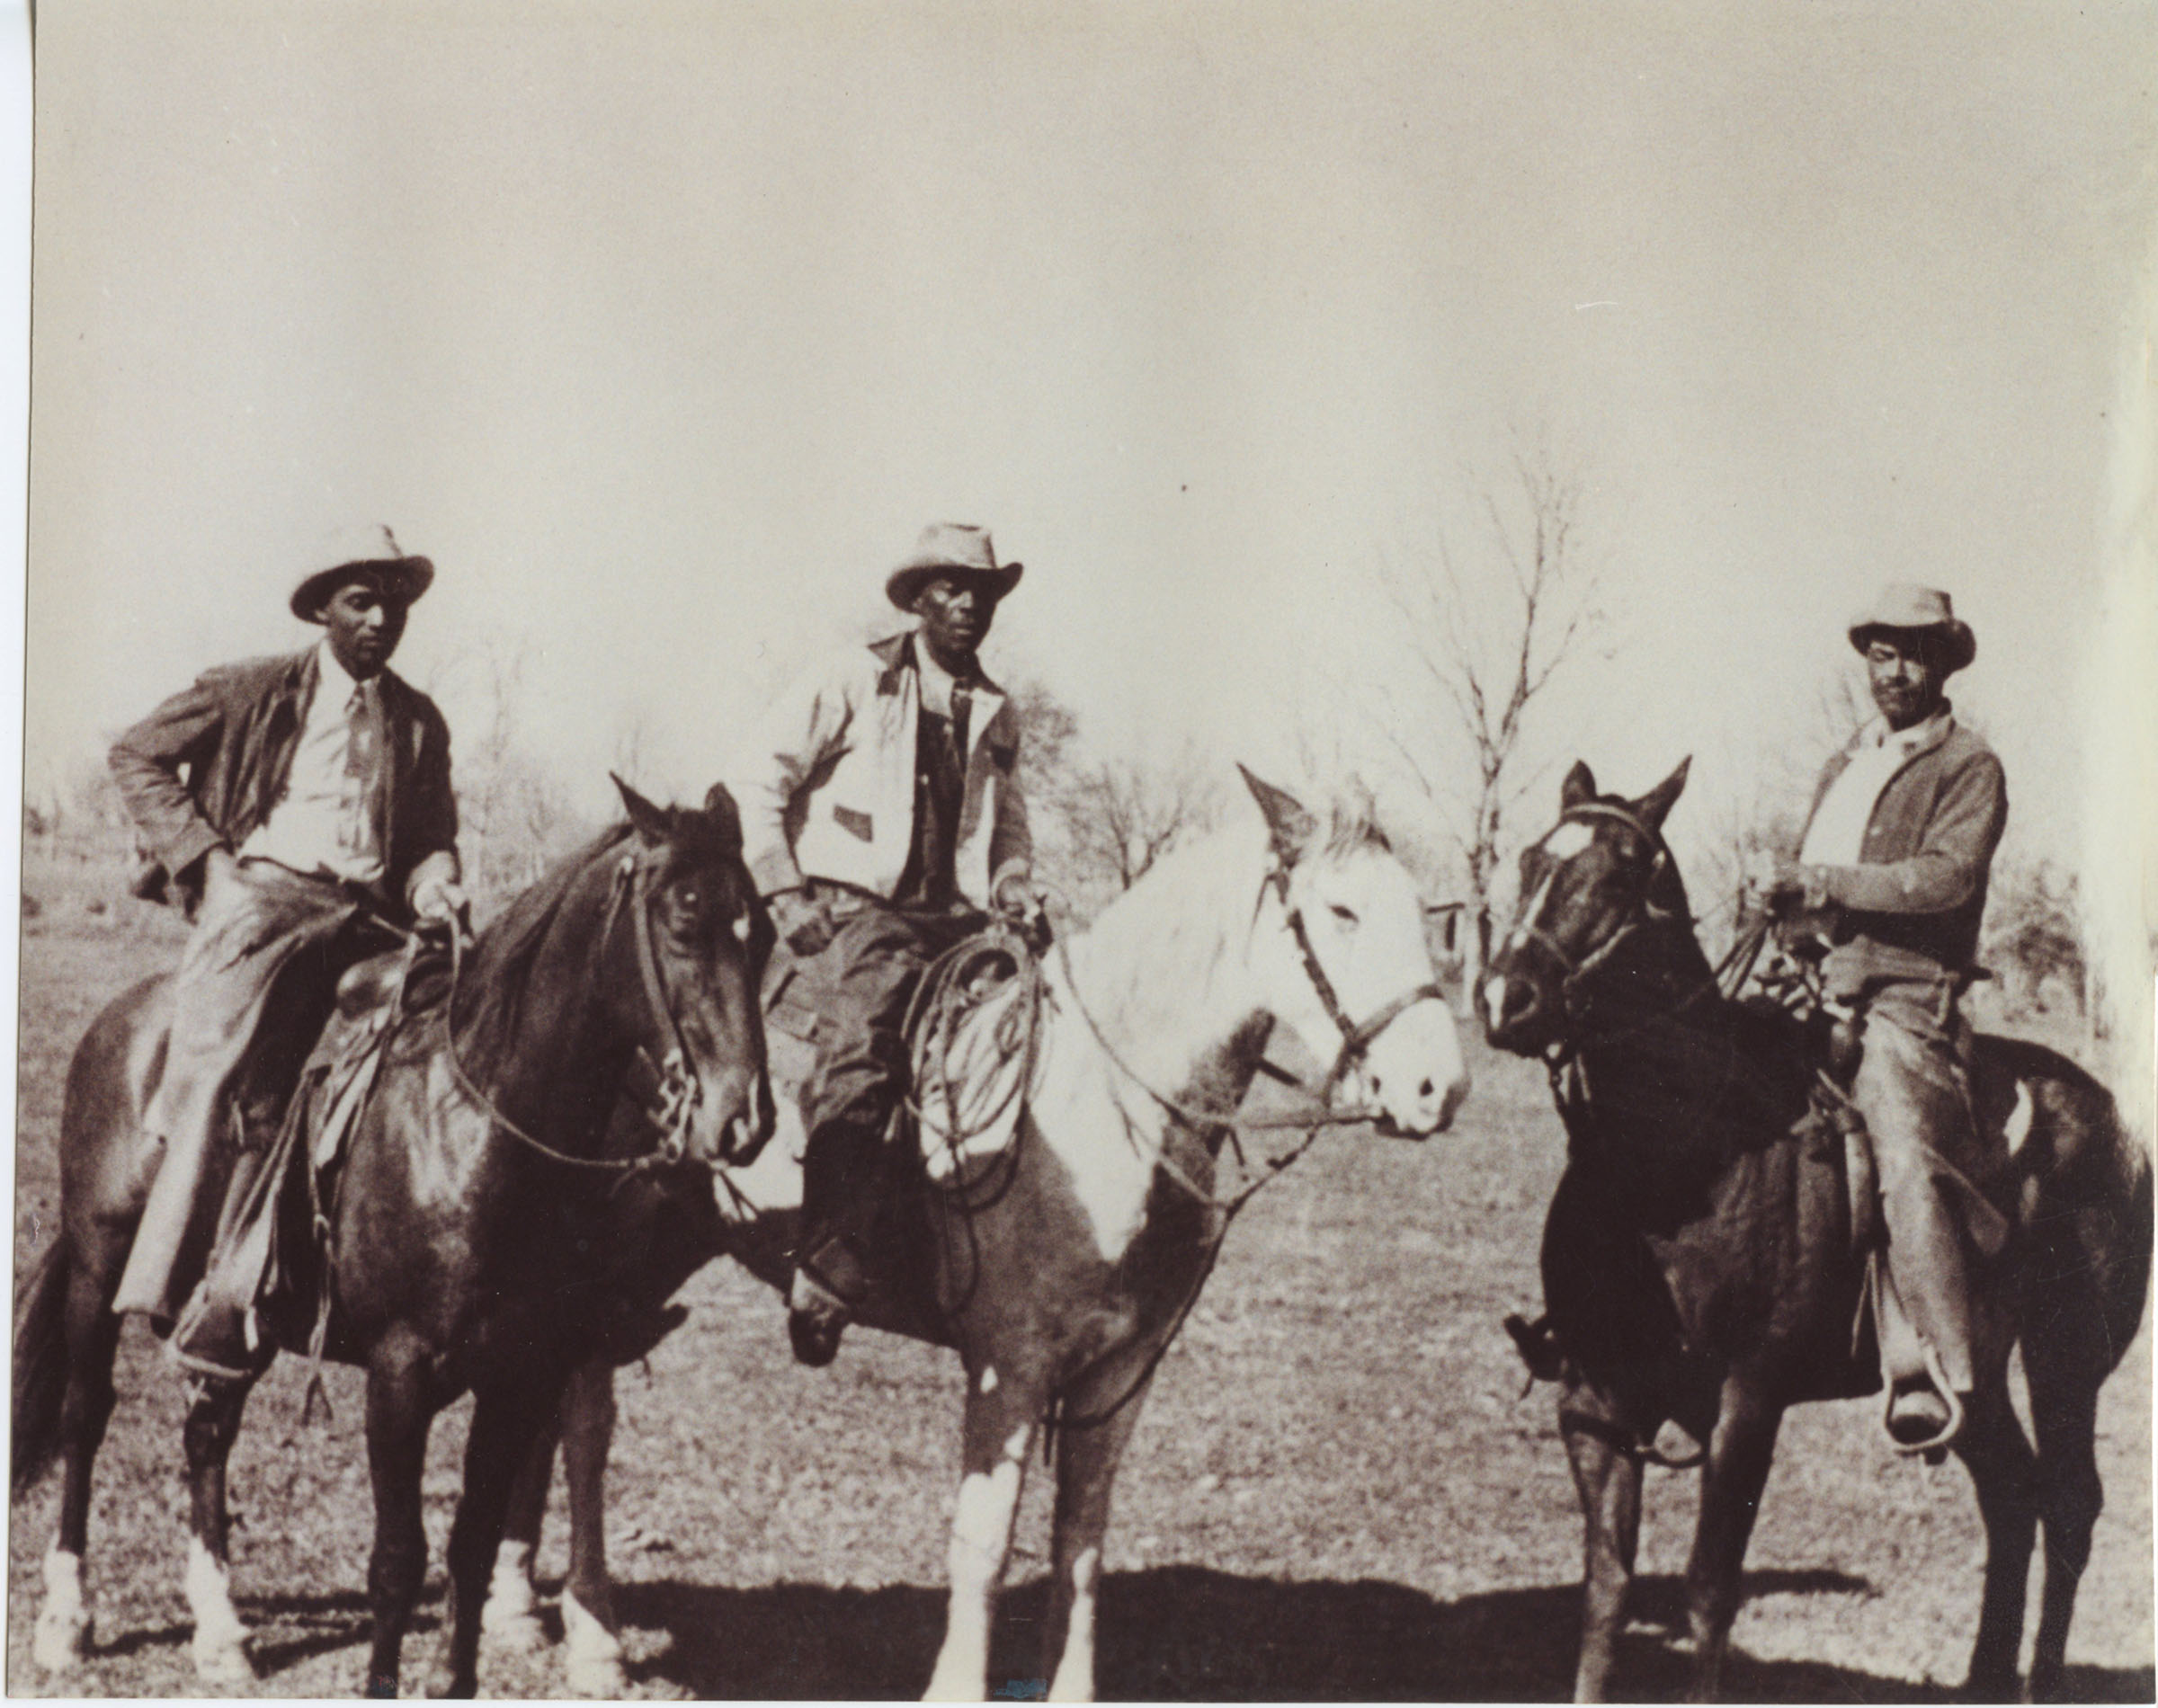 Three men on horseback in small cowboy hats in a barren landscape with one tree